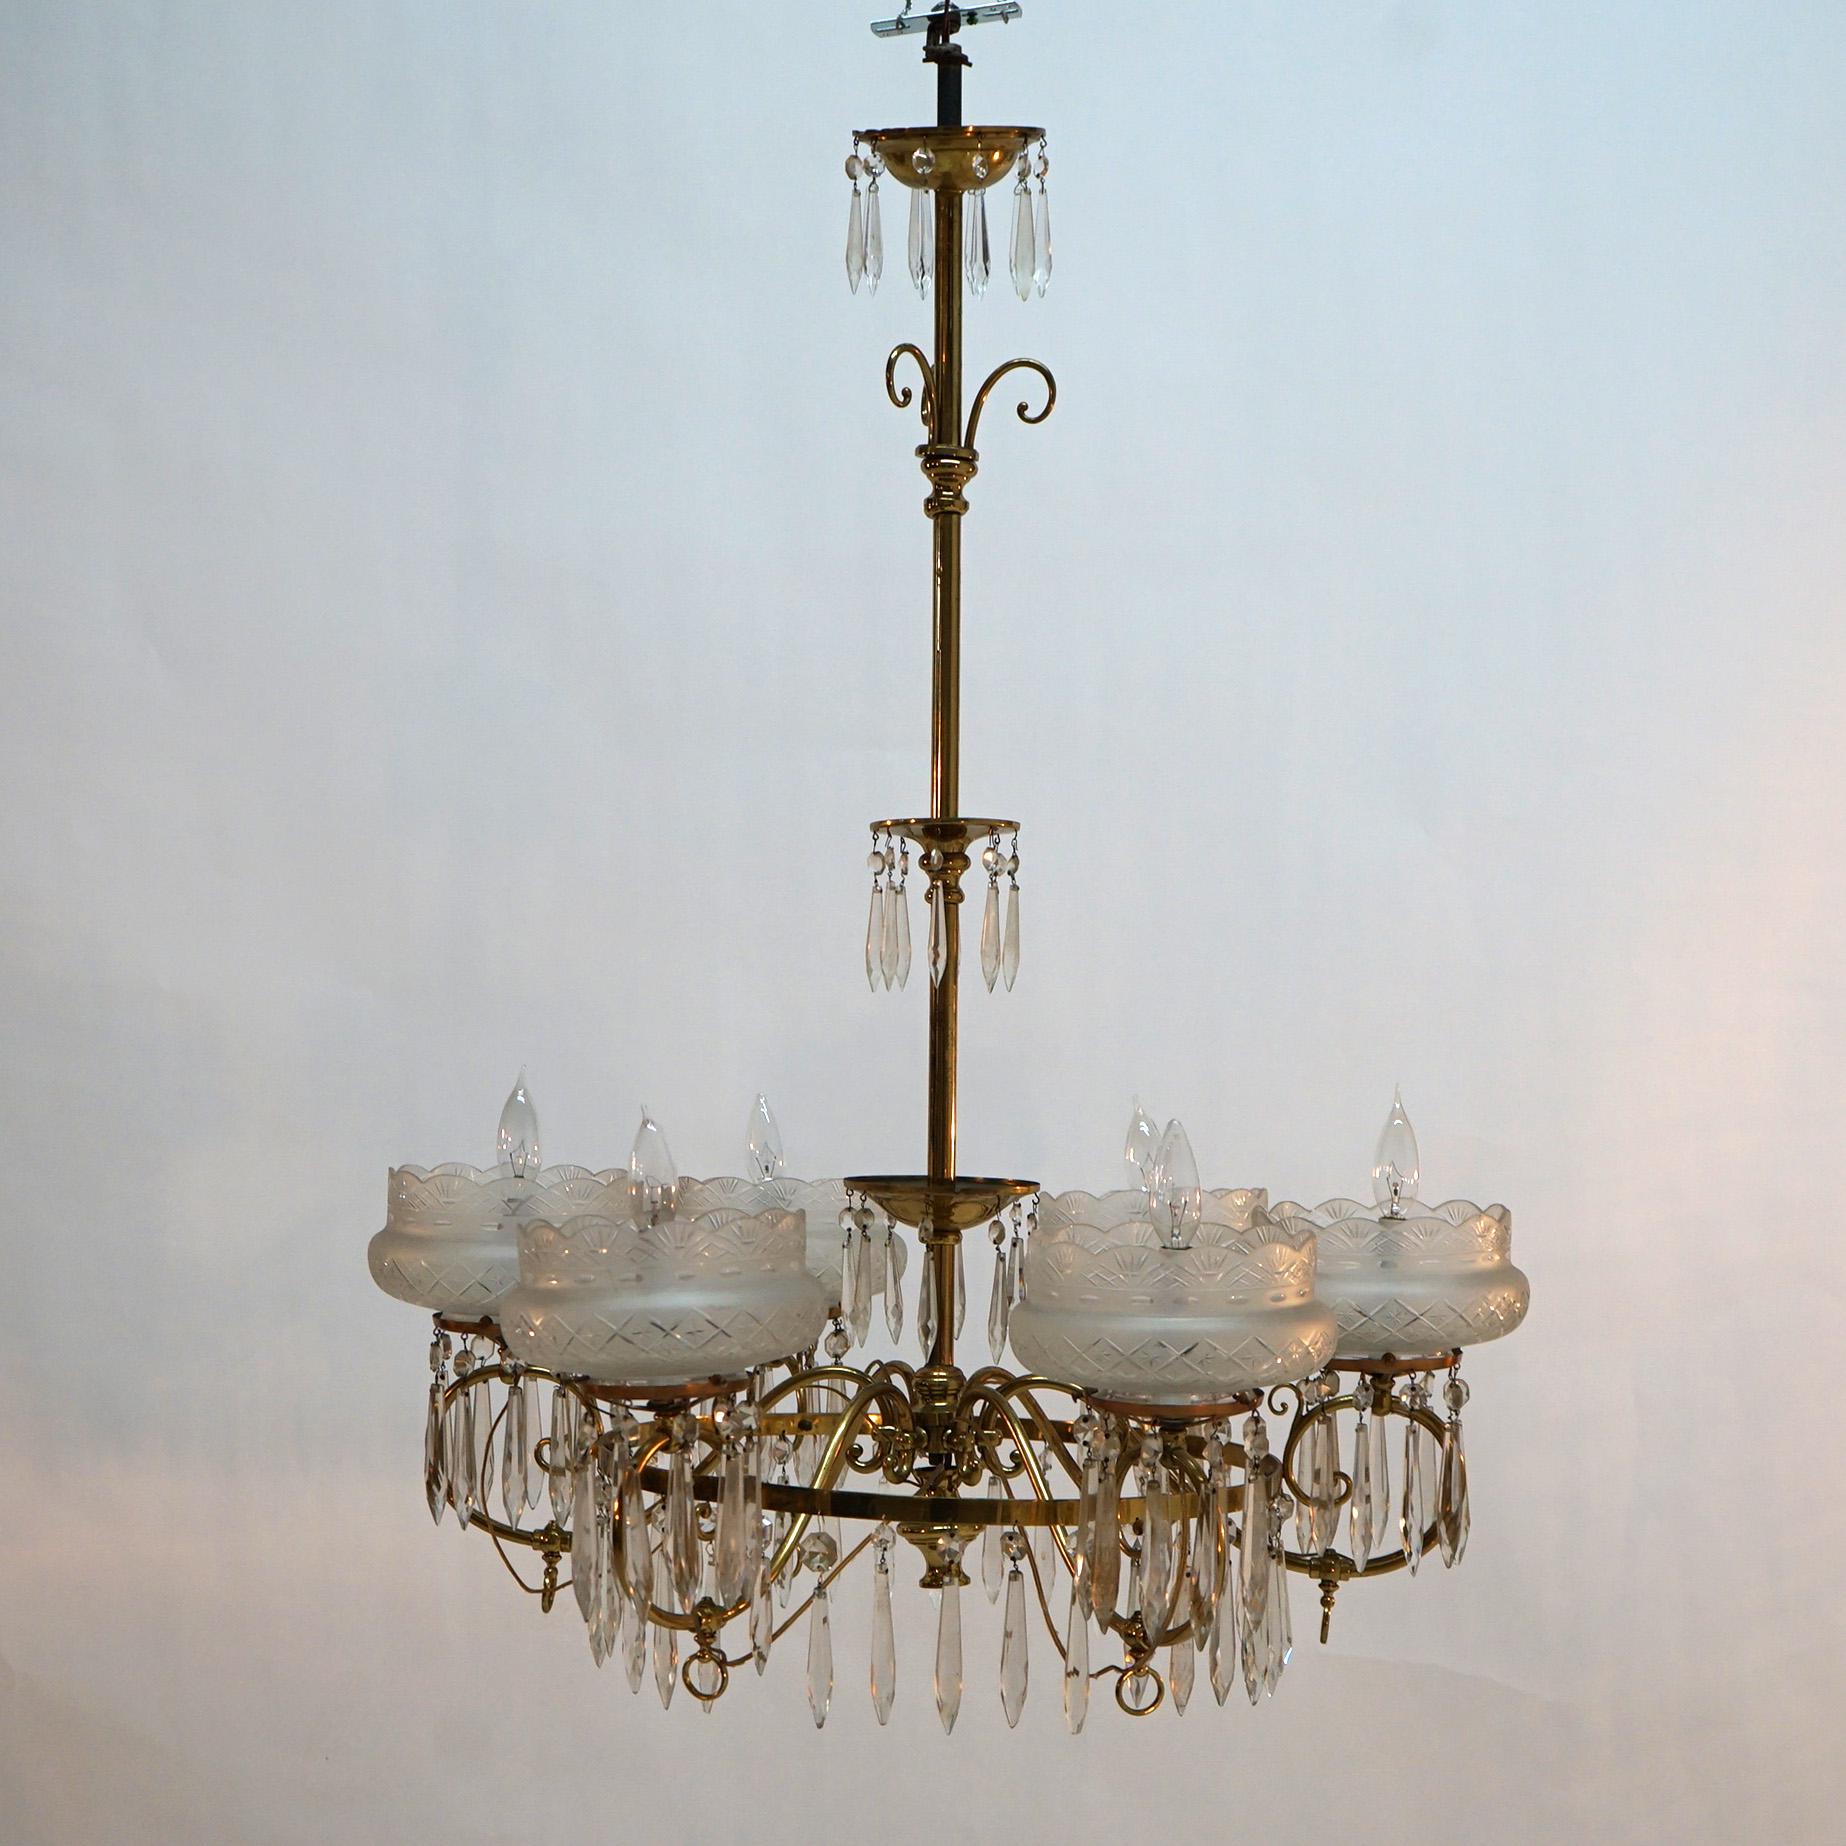 Large Antique Aesthetic Brass Gas Chandelier With Cut Glass Shades & Crystals 14